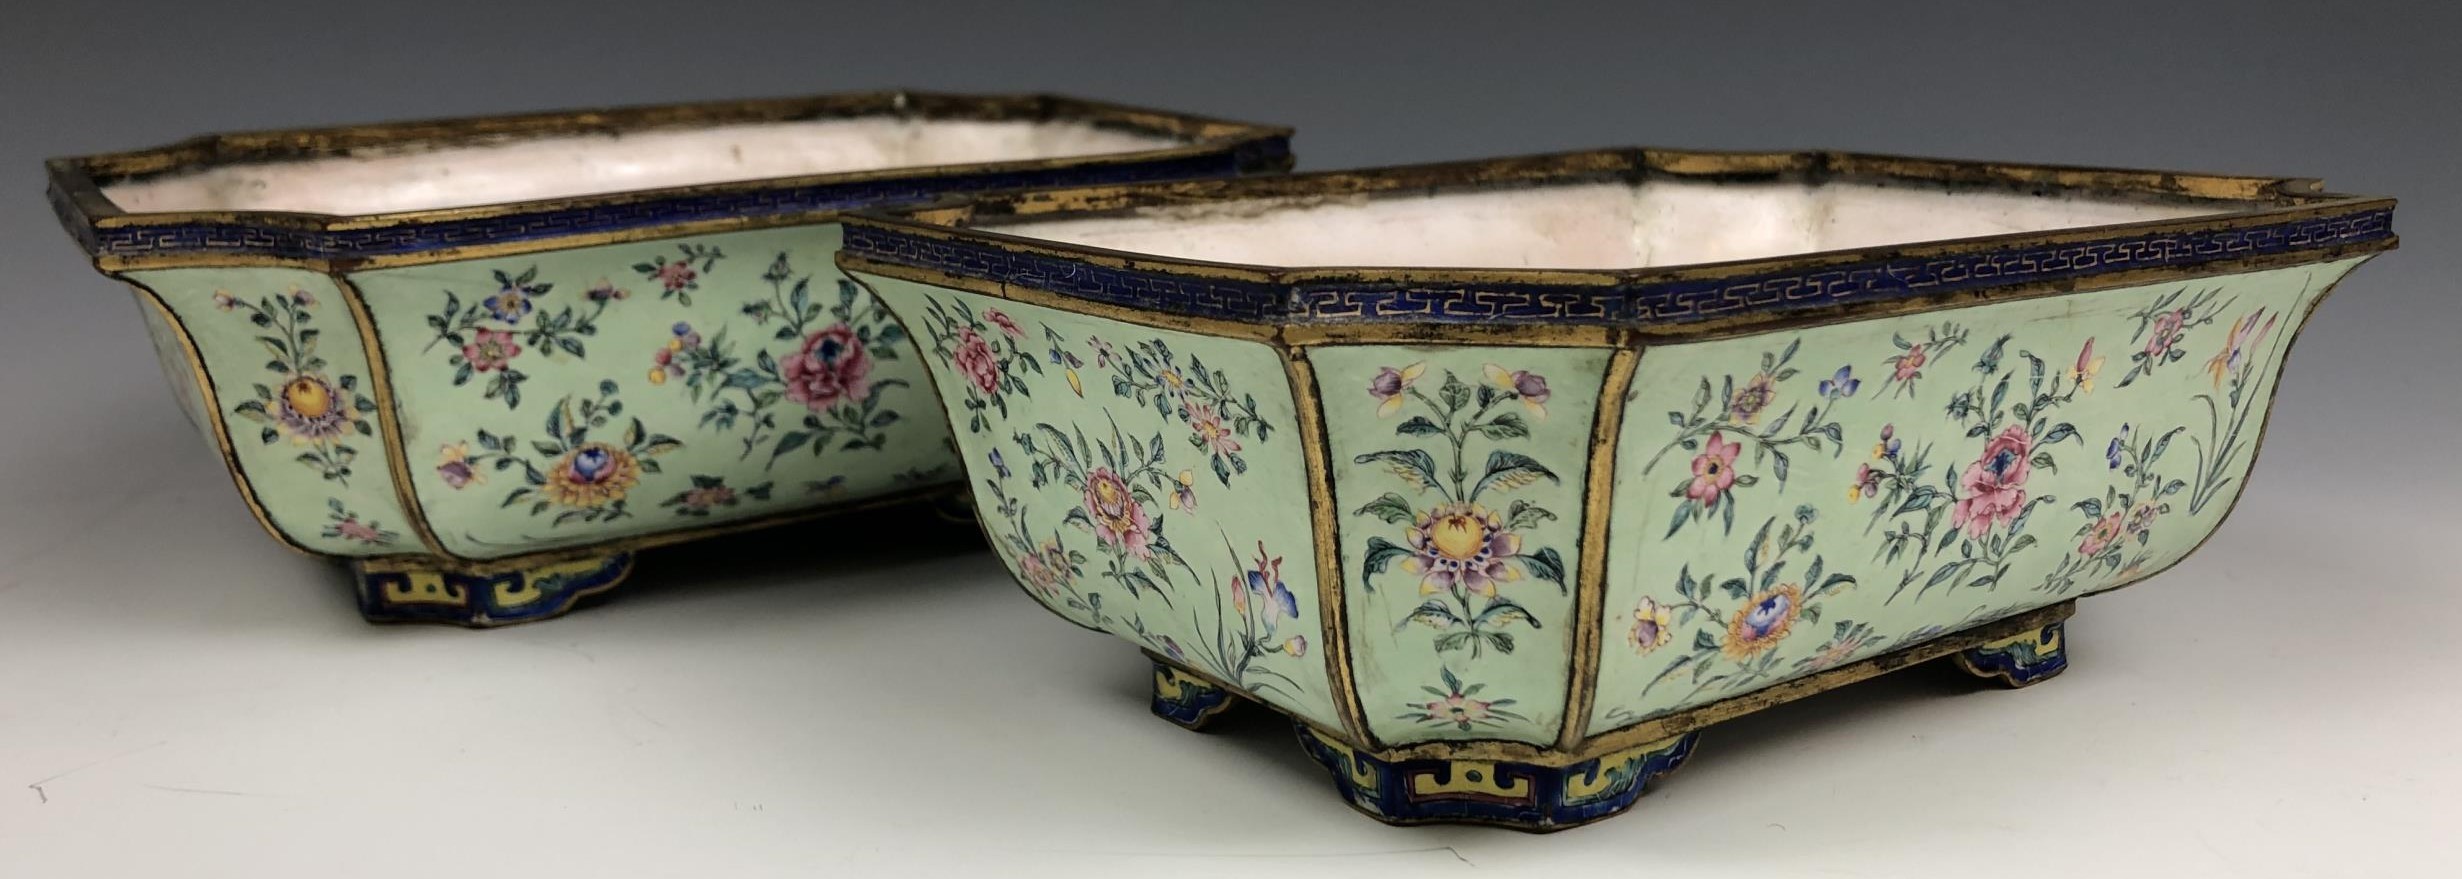 A pair of Chinese Canton enamel jardinieres, decorated flowers on a pale green ground, 19.5 cm